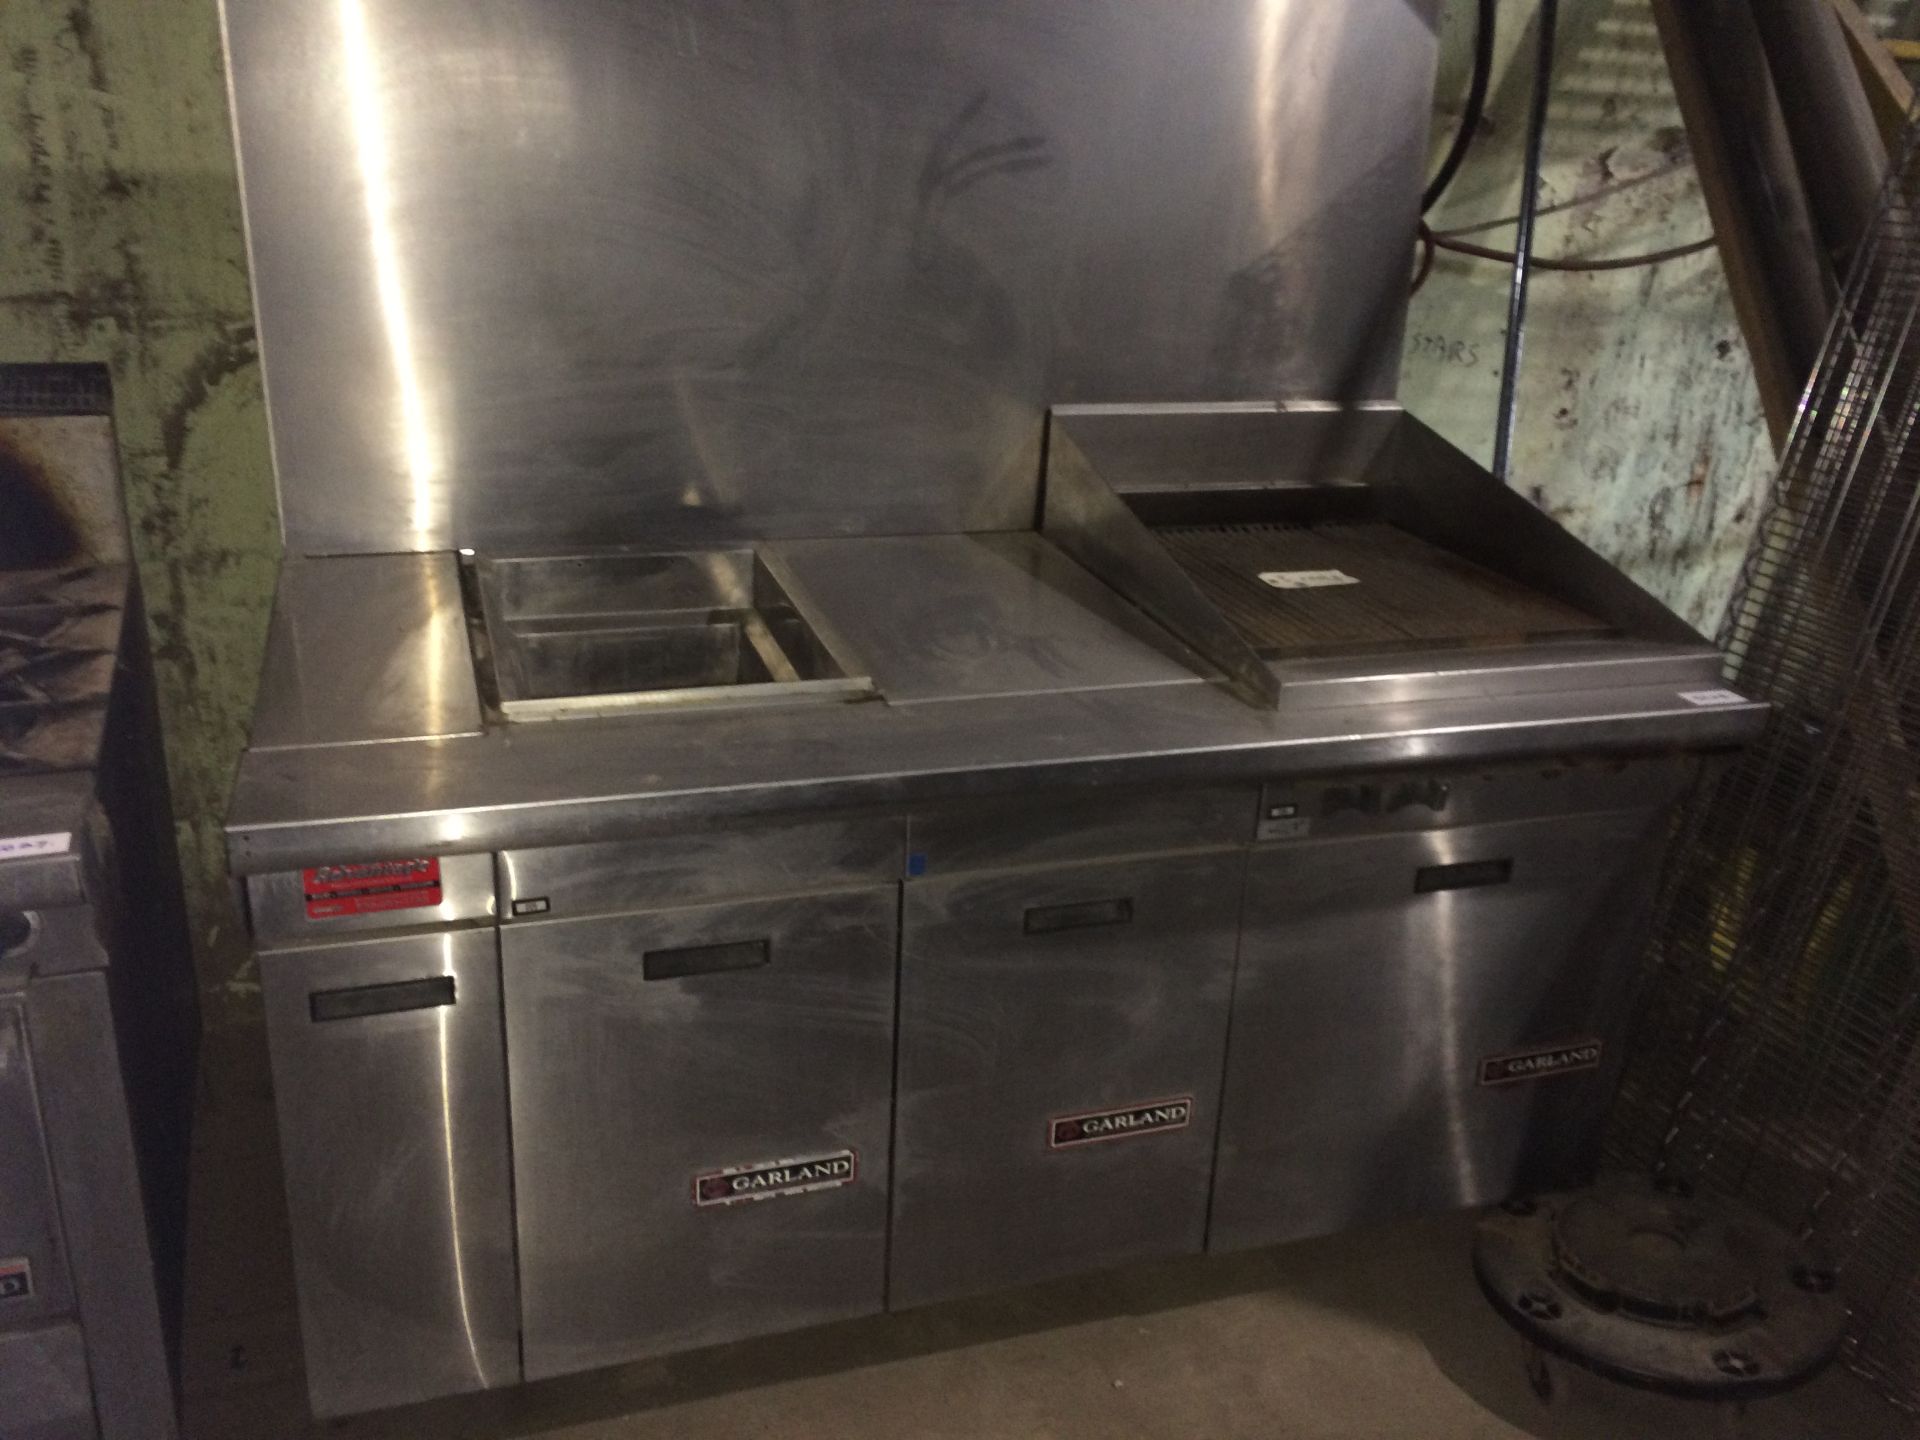 Banked Garland custom cook centre, c/w deep fryer and charbroiler, Parts Purchase or refurb